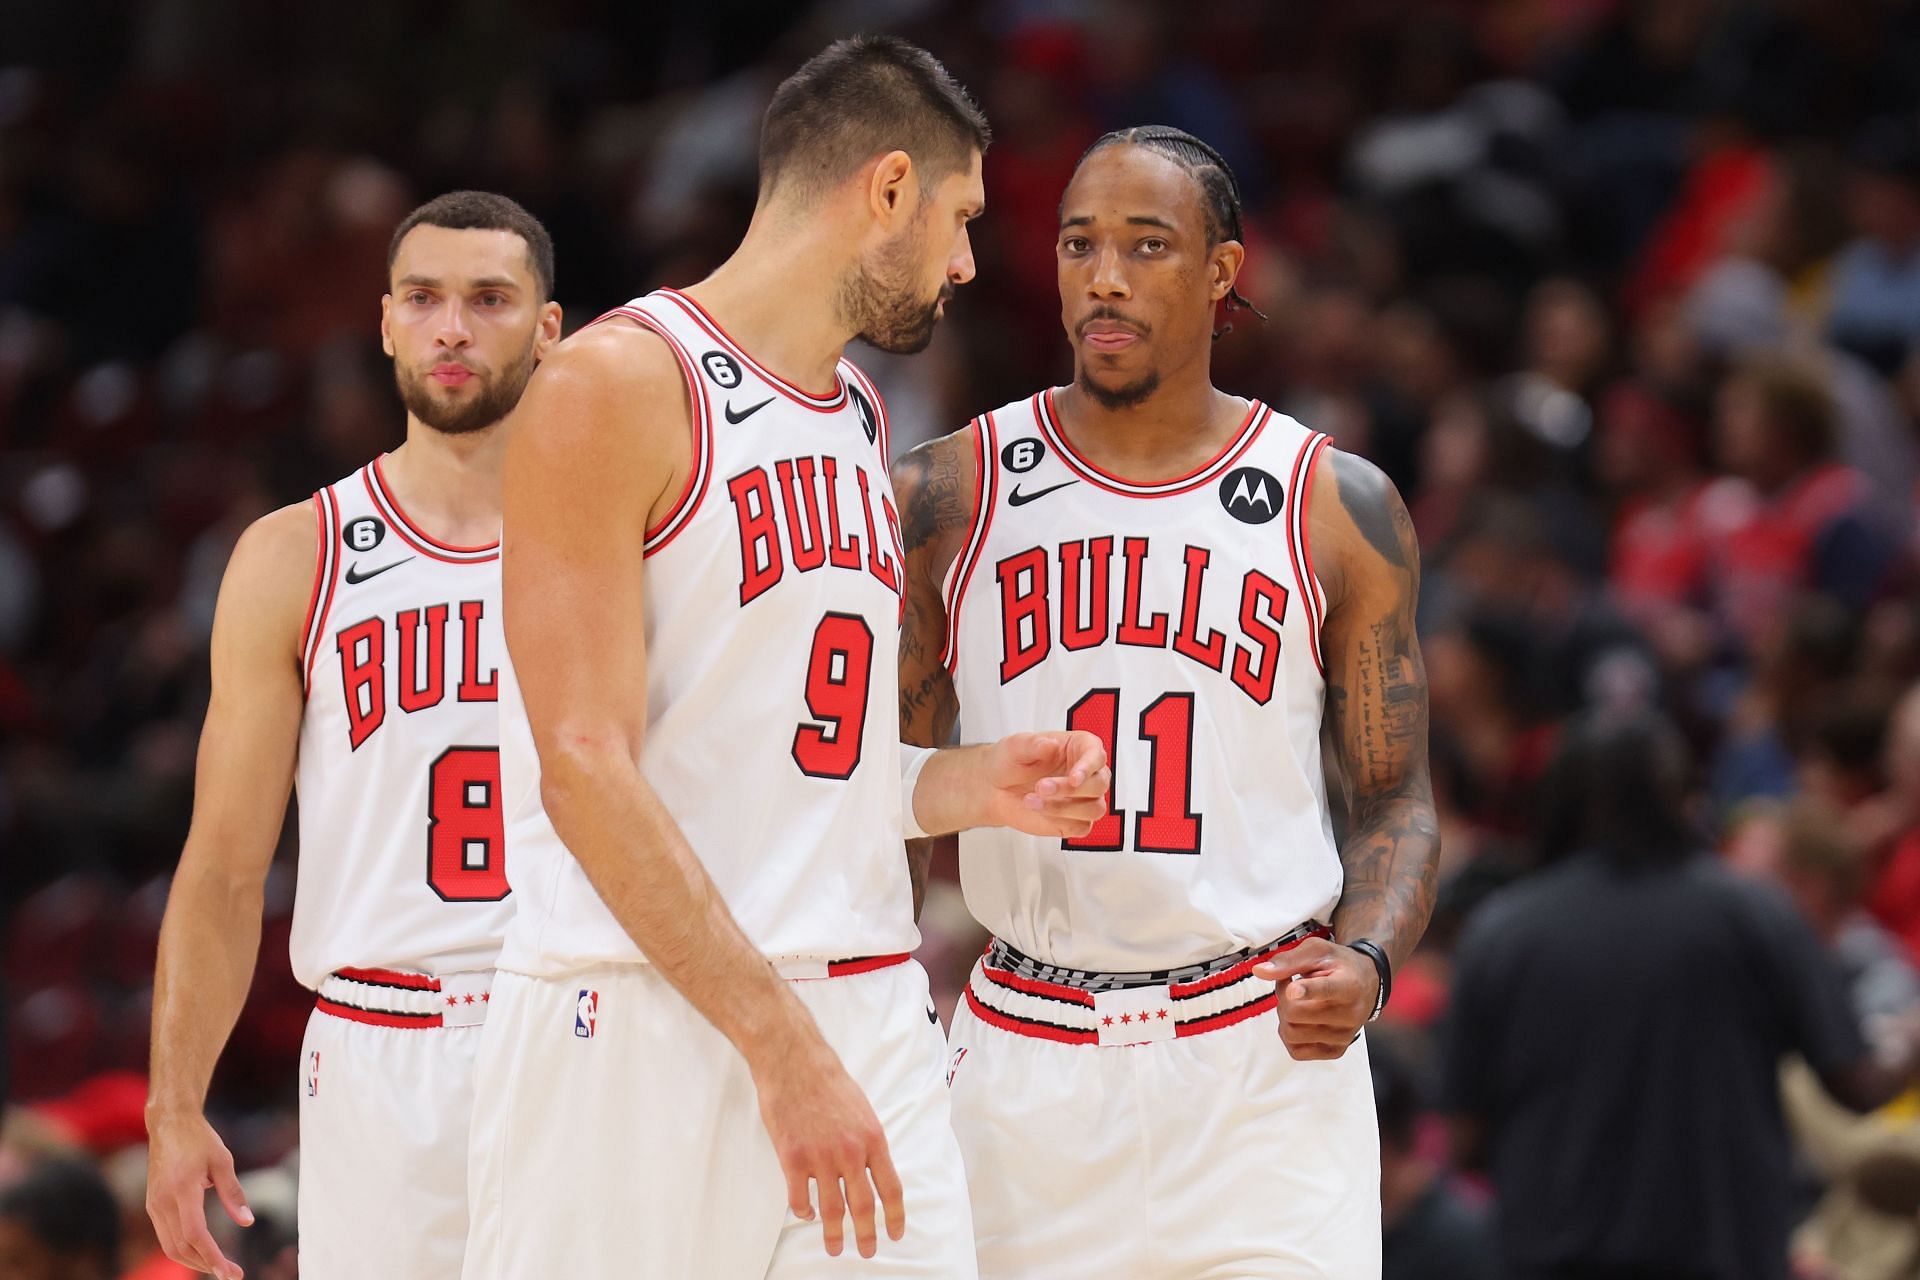 The Chicago Bulls&#039; Big Three delivered when needed most tonight by the team.